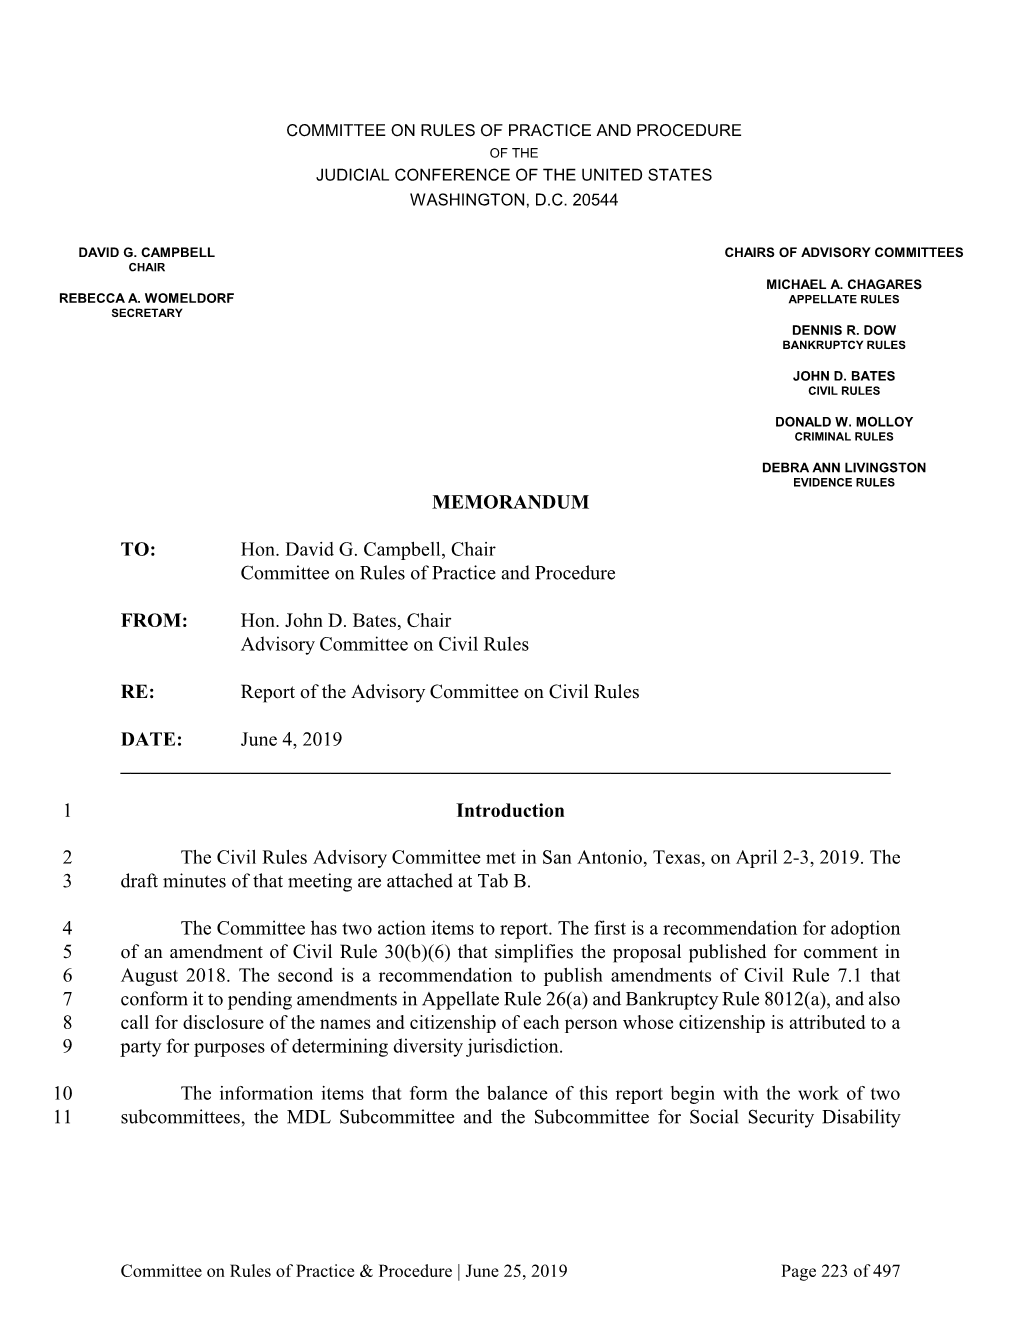 MEMORANDUM TO: Hon. David G. Campbell, Chair Committee on Rules of Practice and Procedure FROM: Hon. John D. Bates, Chair Adviso